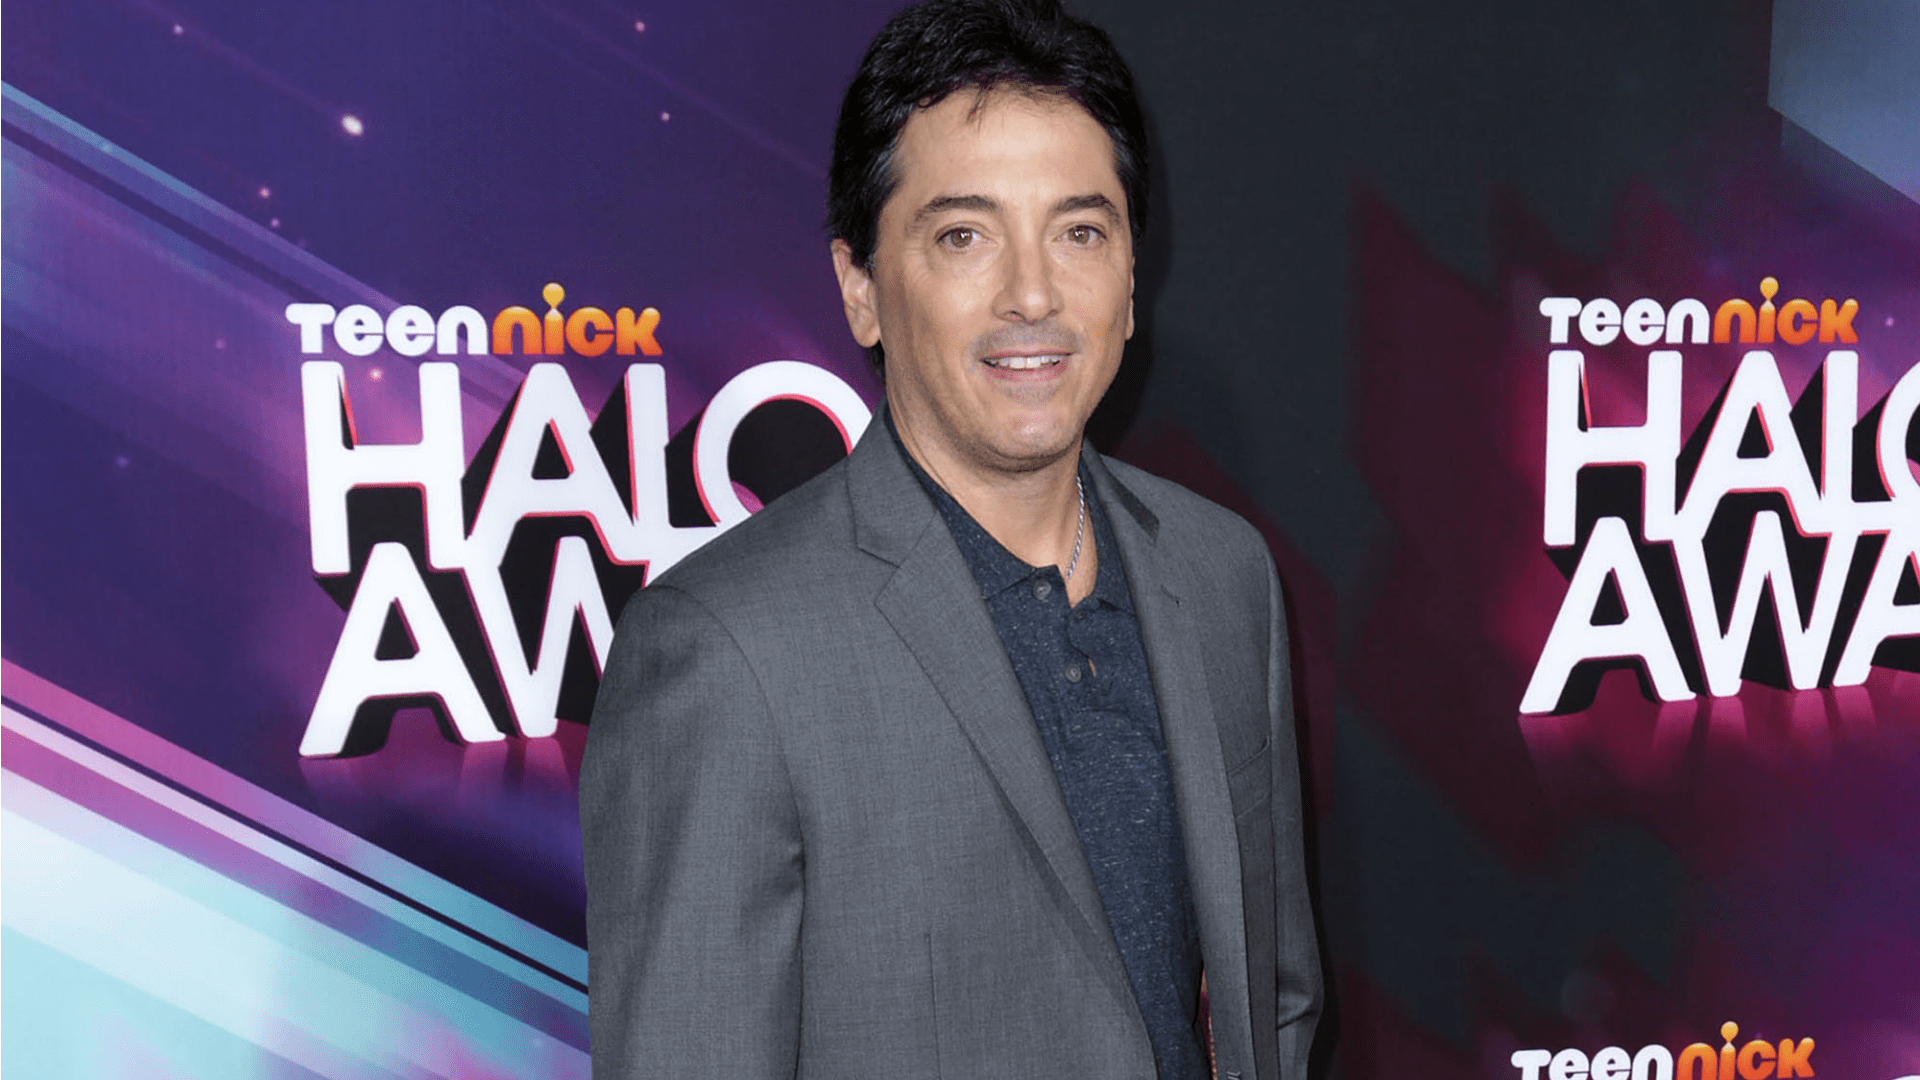 If you don't support Trump, Scott Baio says to 'grow up'